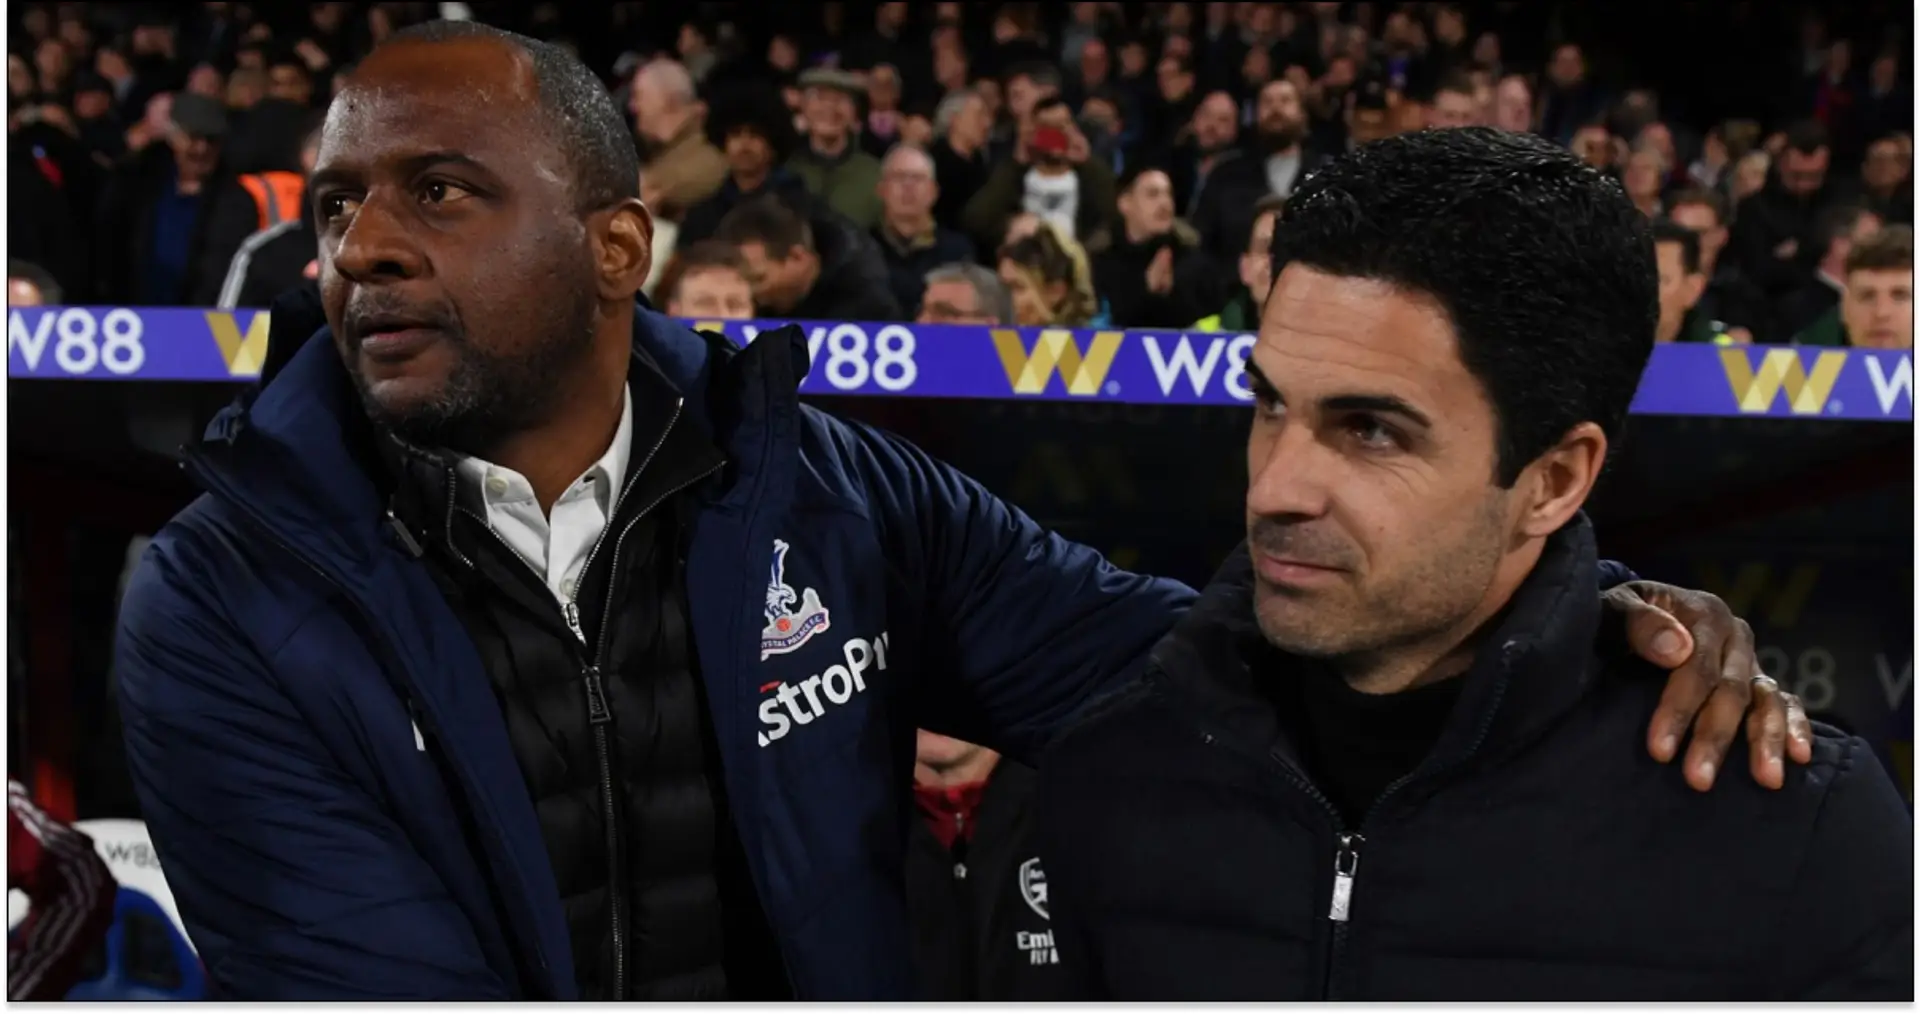 'Best luck for next chapter which will be really fascinating': Arteta sends message to sacked Vieira